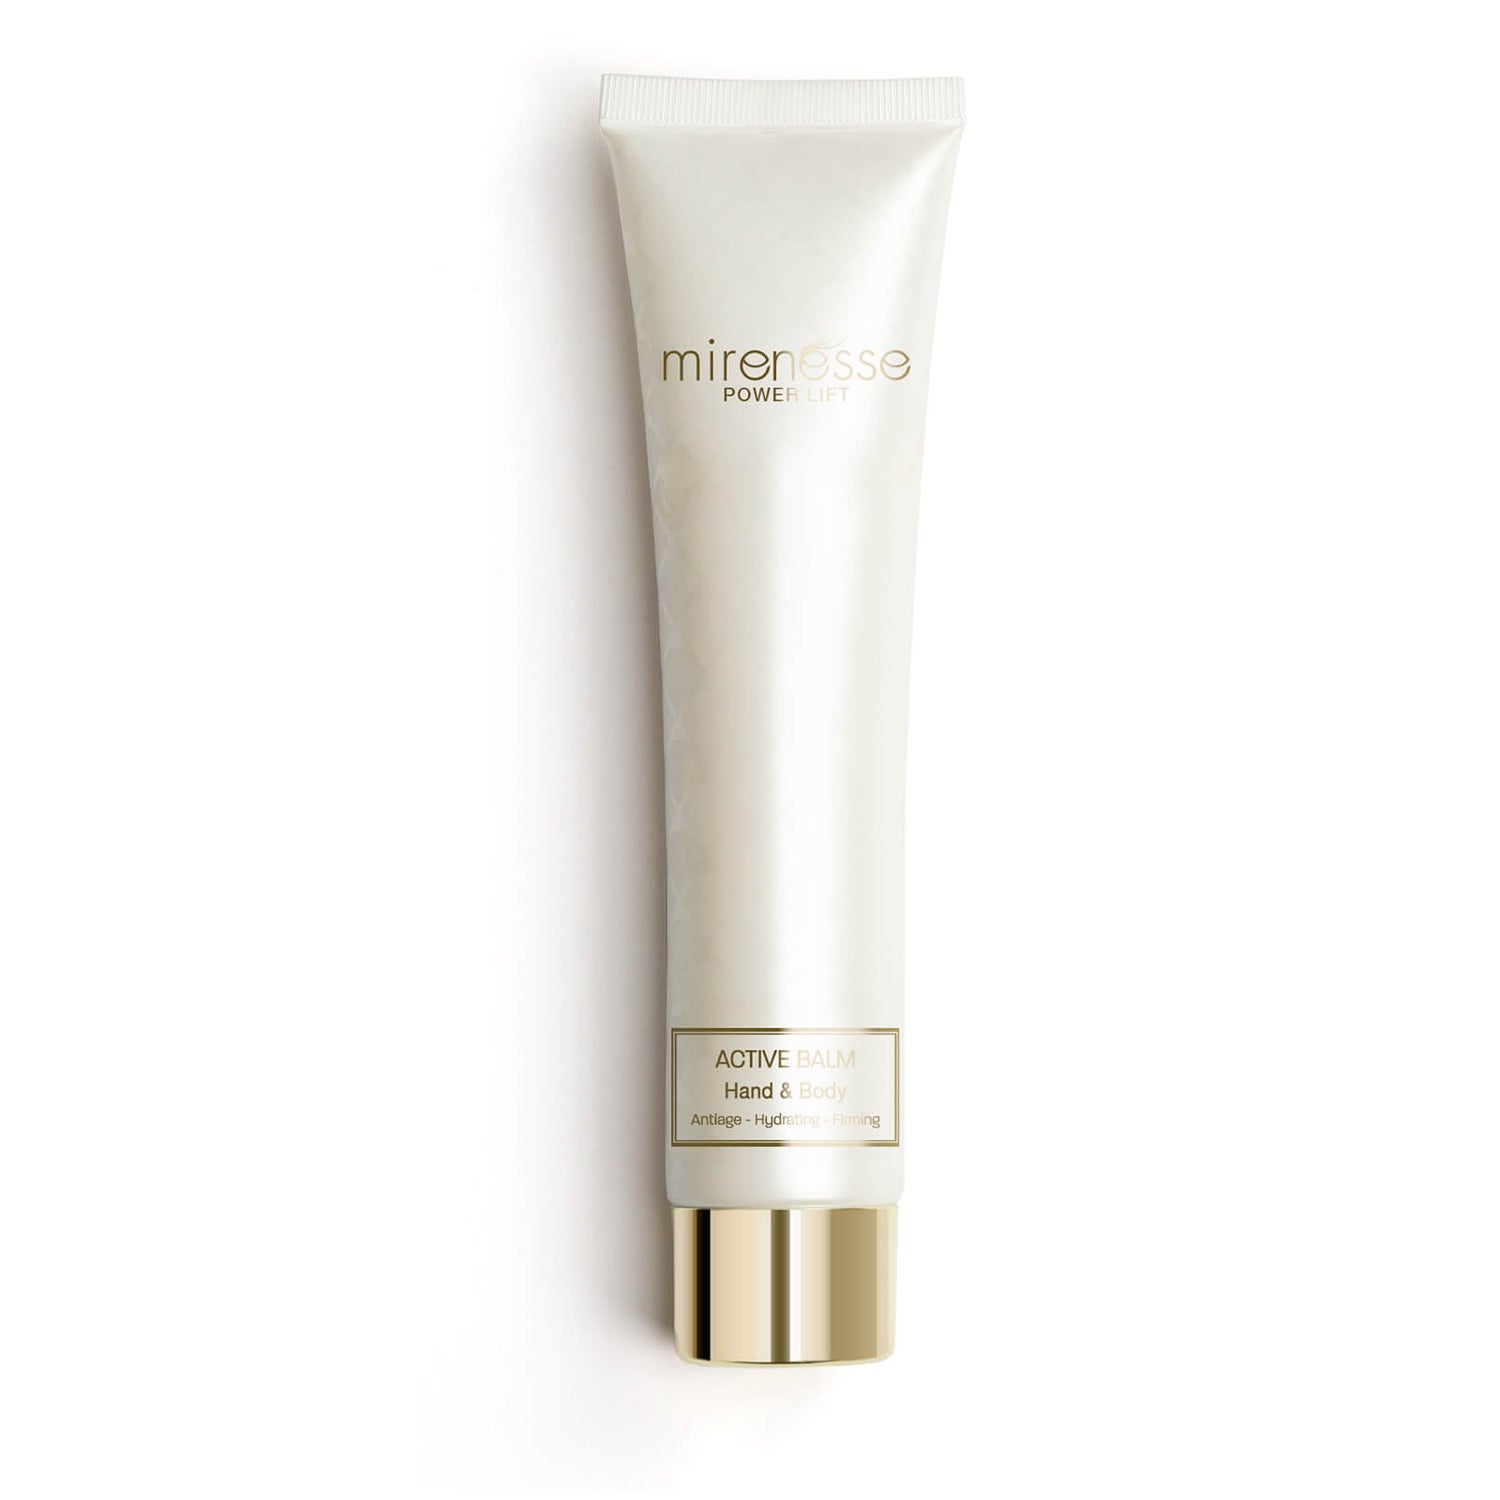 mirenesse Power Lift Active Anti-Ageing Hand and Body Balm 60g